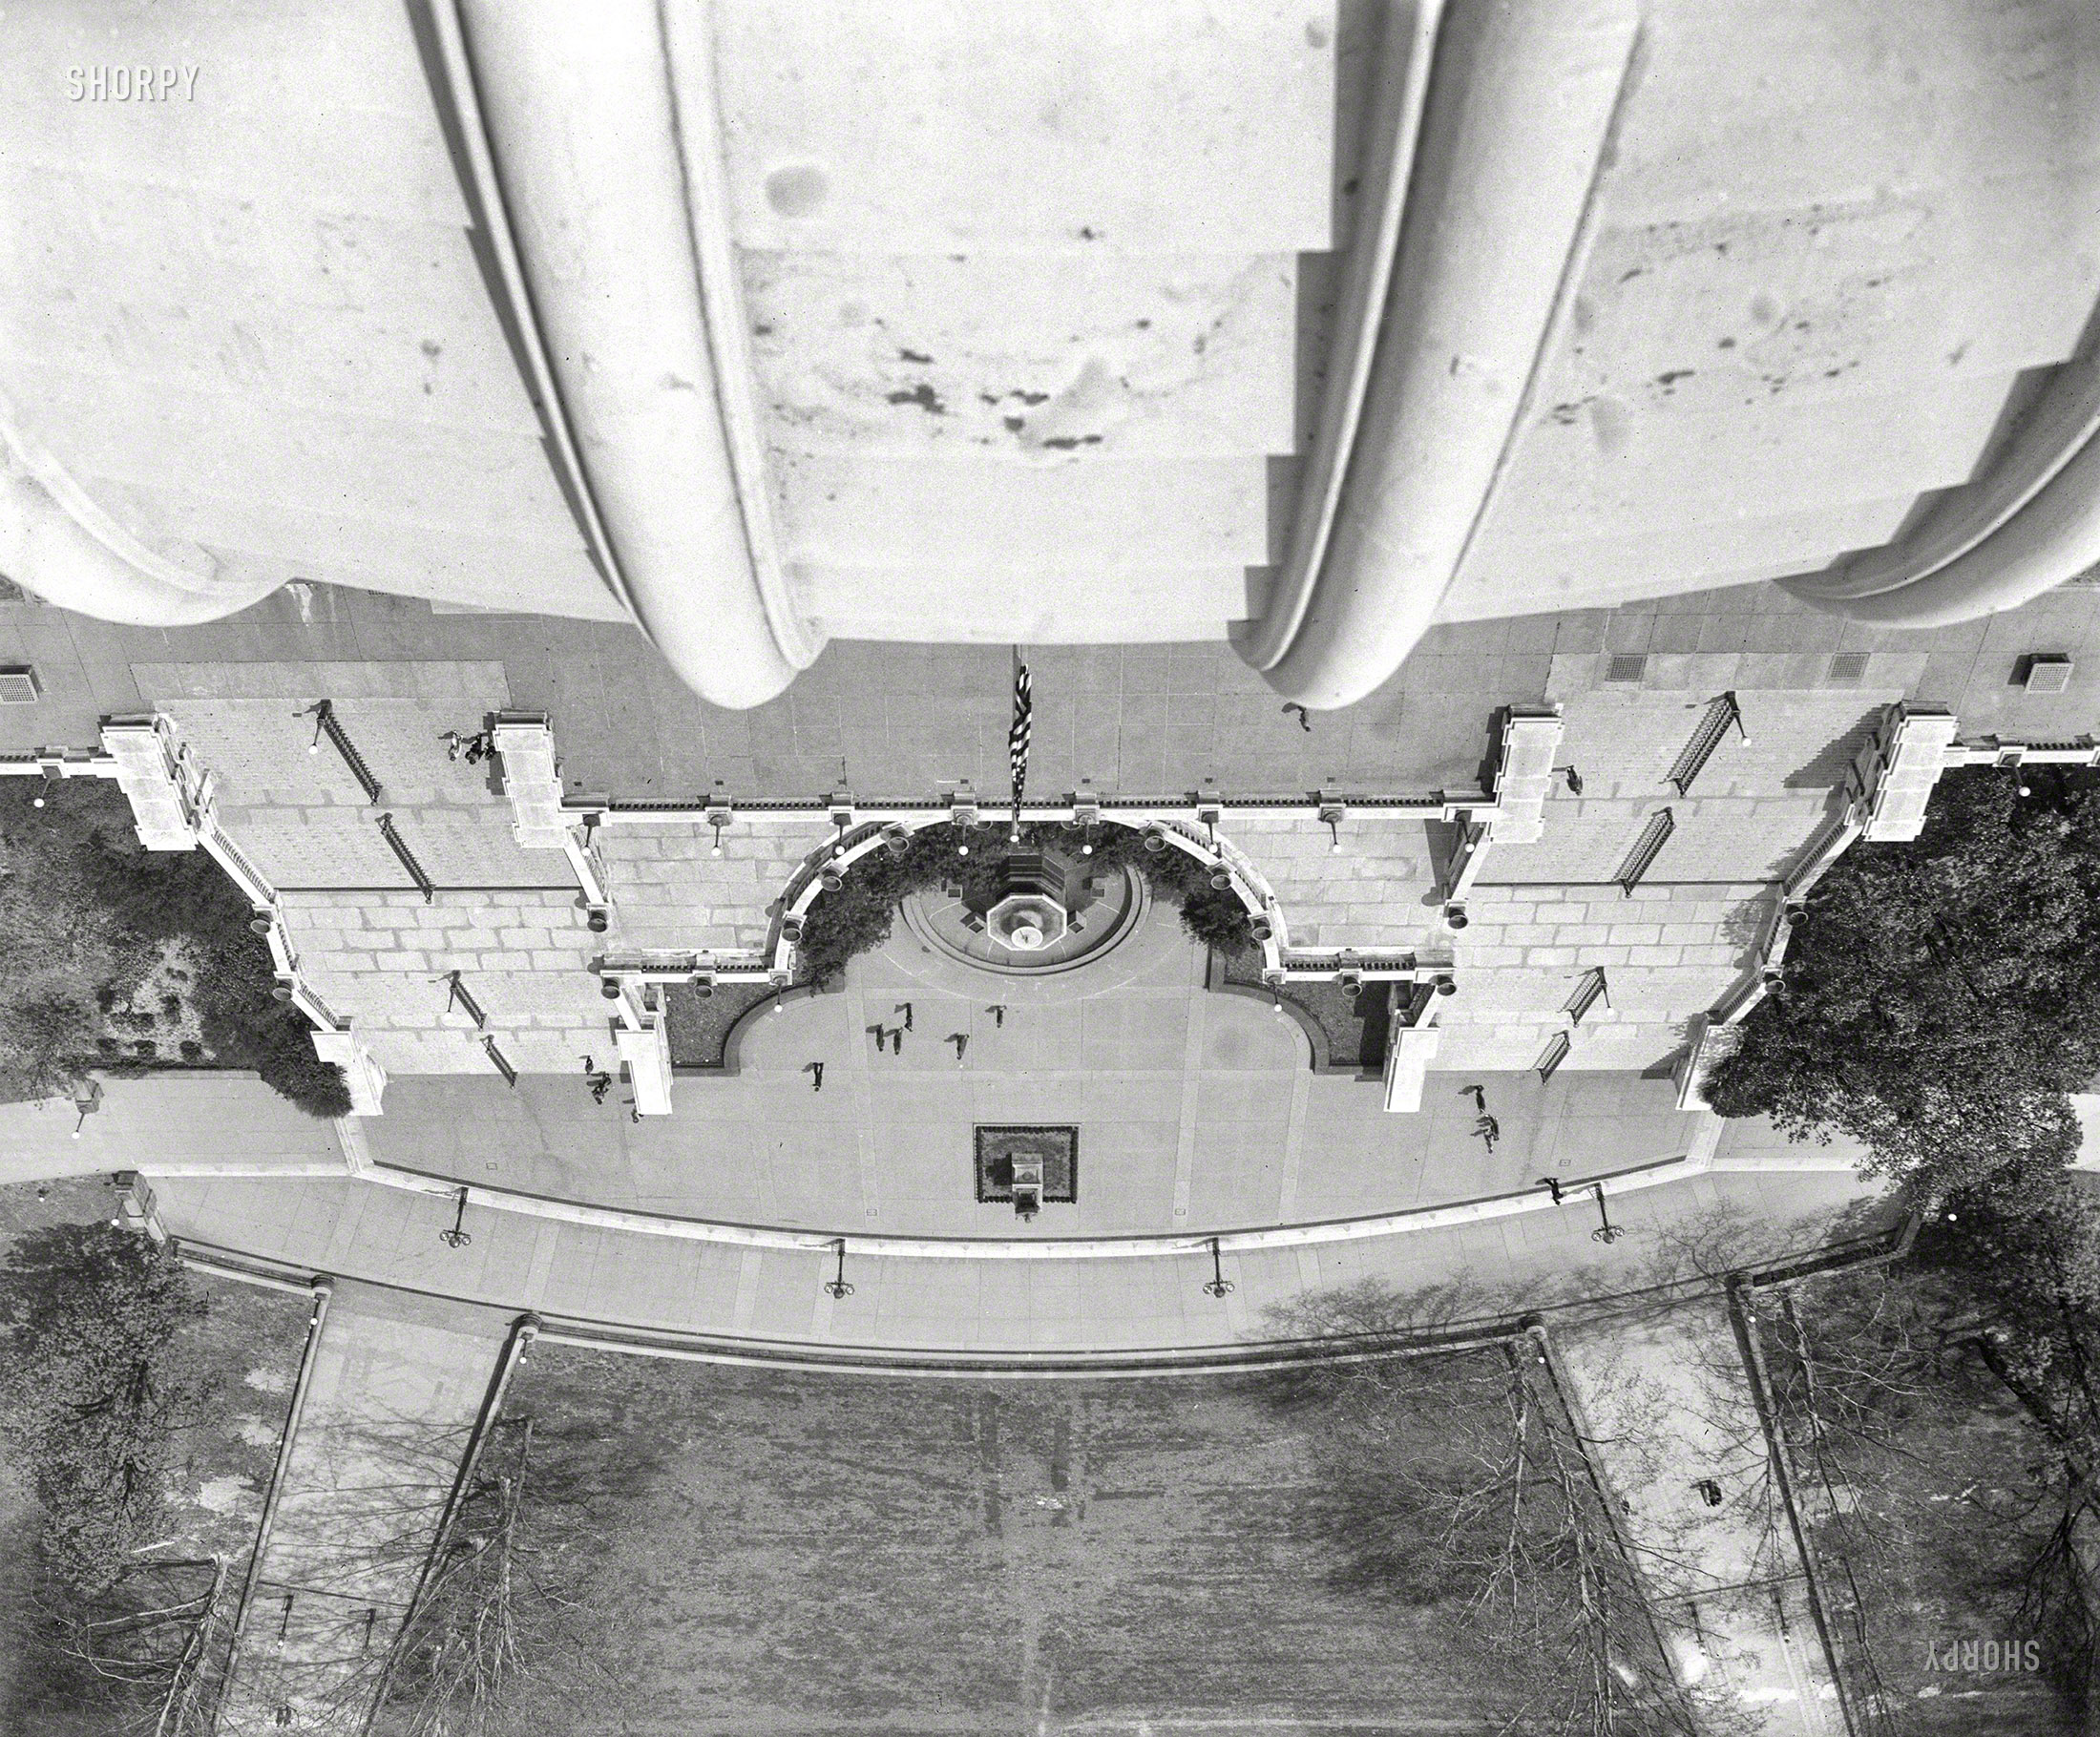 1935. Washington, D.C. "View looking down from U.S. Capitol dome, West Front." Harris & Ewing Collection glass negative. View full size.